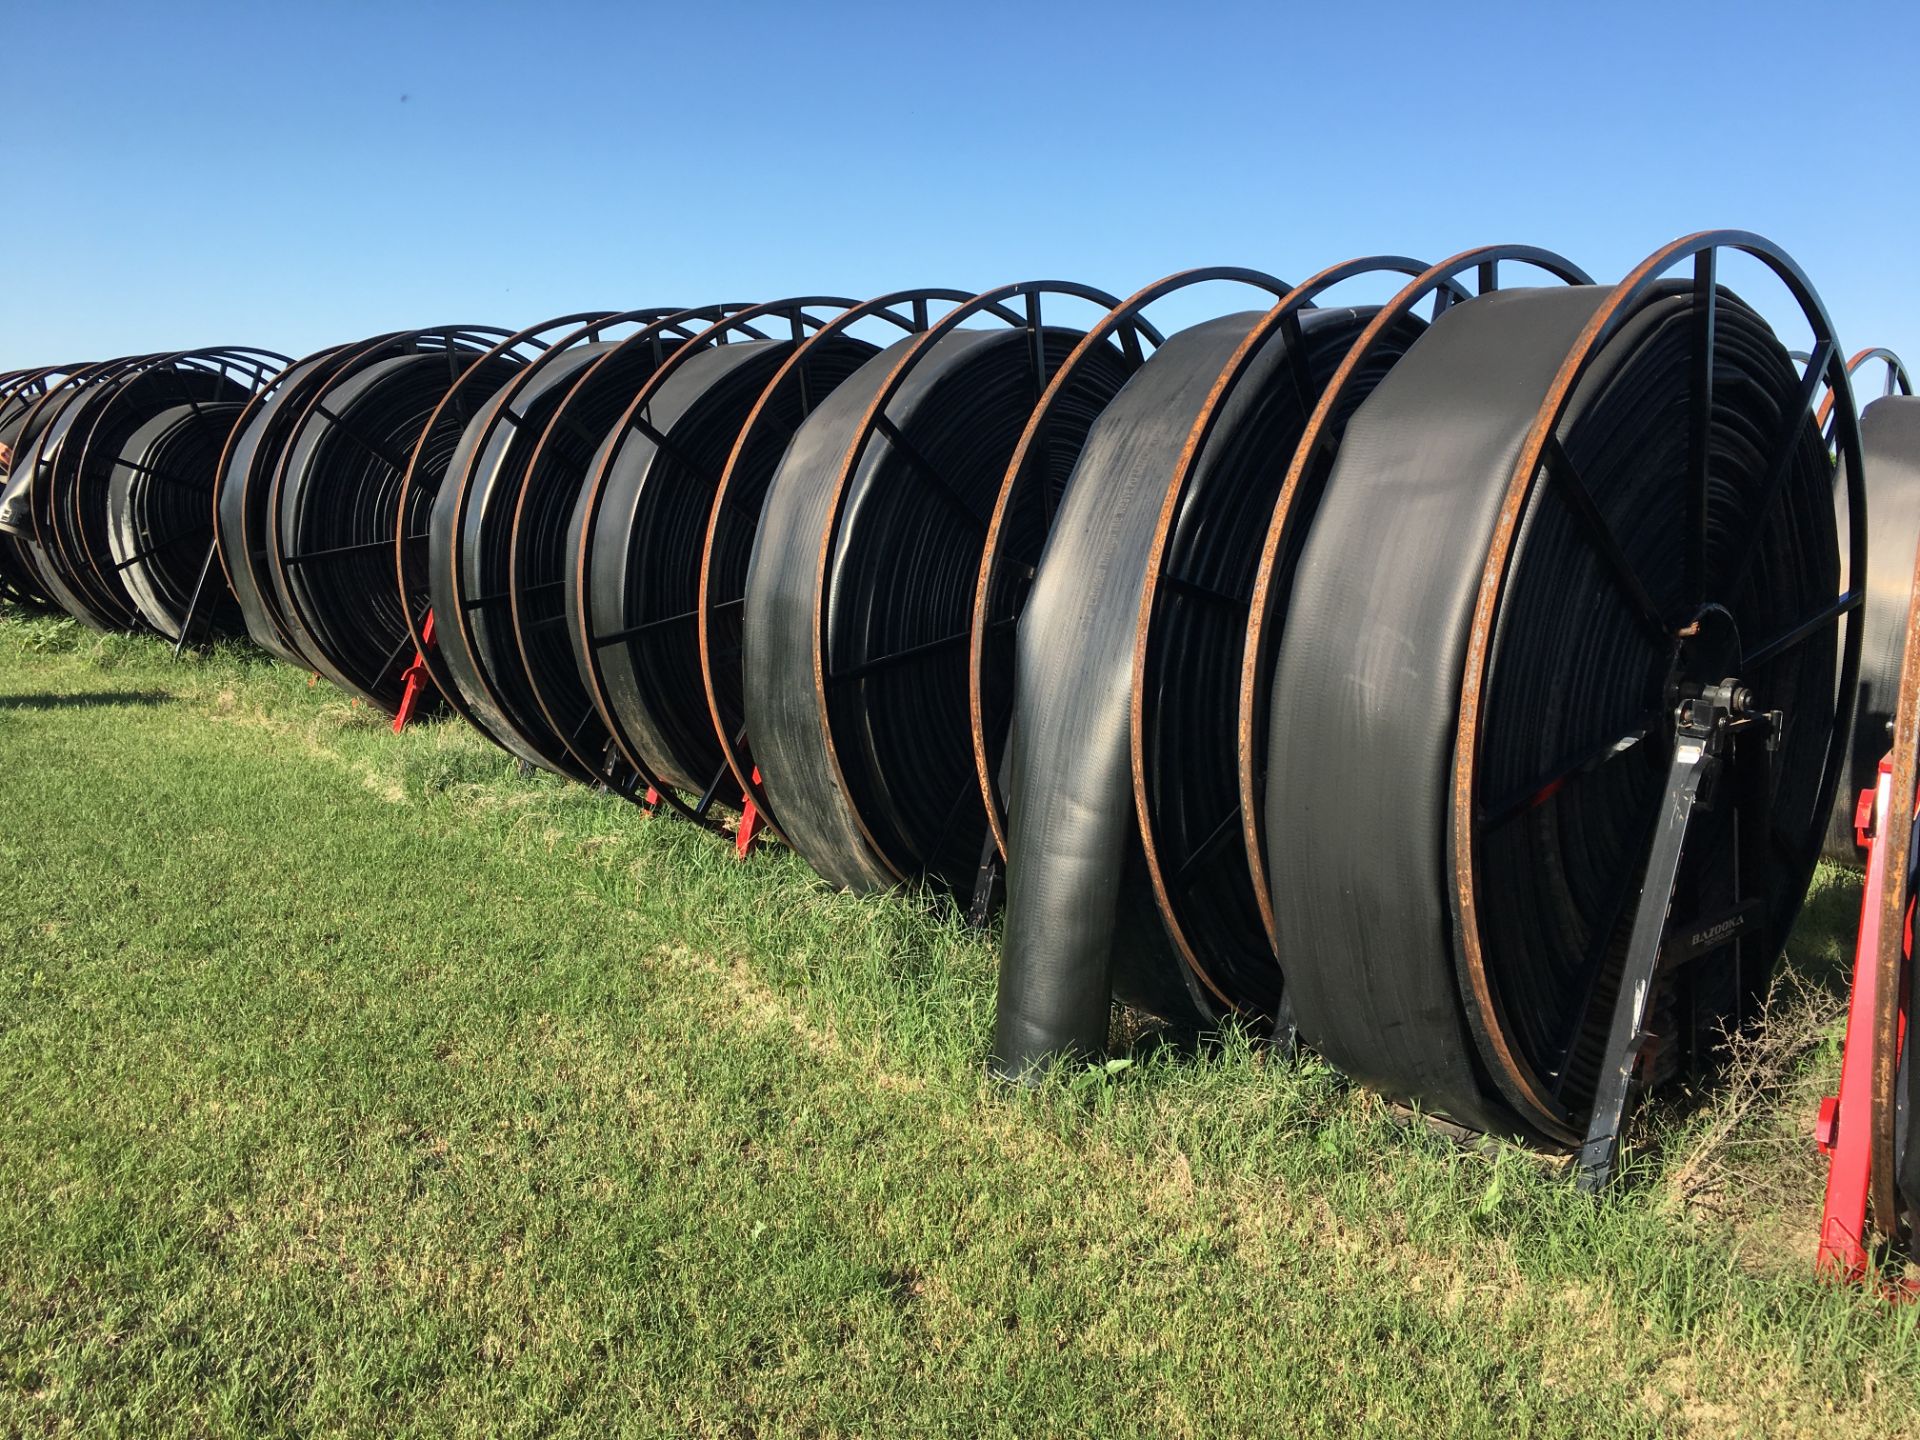 660ft. of 12in. LAY FLAT HOSE ON BAZOOKA HOSE REELS, EACH UNIT NUMBERED SEPARATELY WITH PAINT - Image 15 of 39